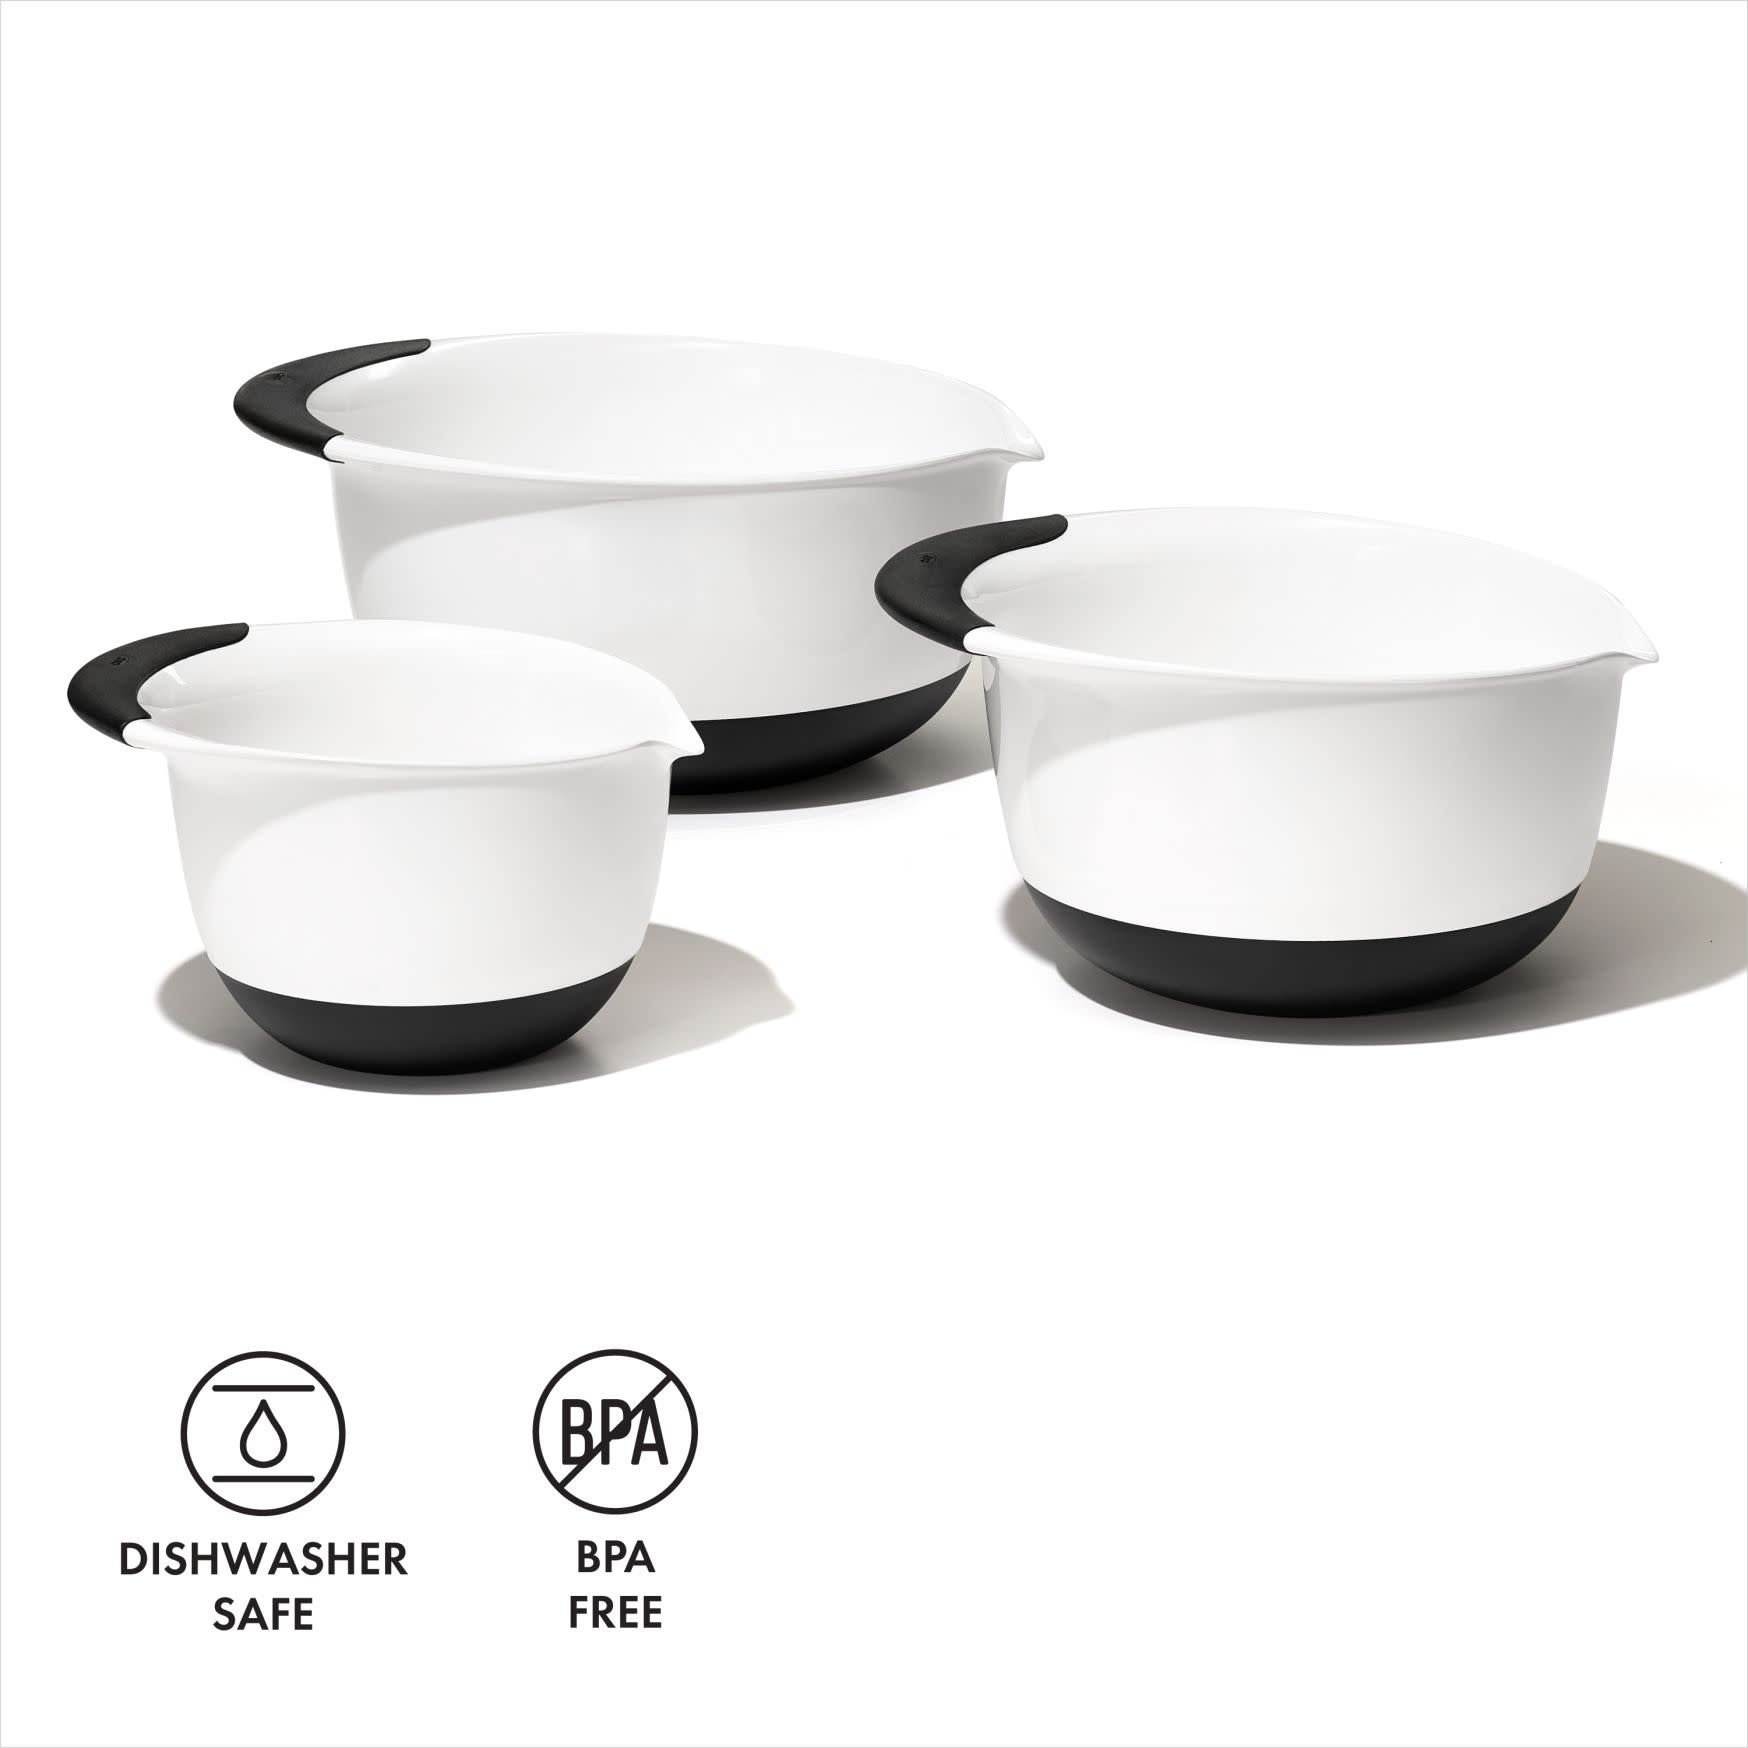 OXO Good Grips Mixing Bowl Set - White/Colored Grip, 3 Pc. - Spoons N Spice